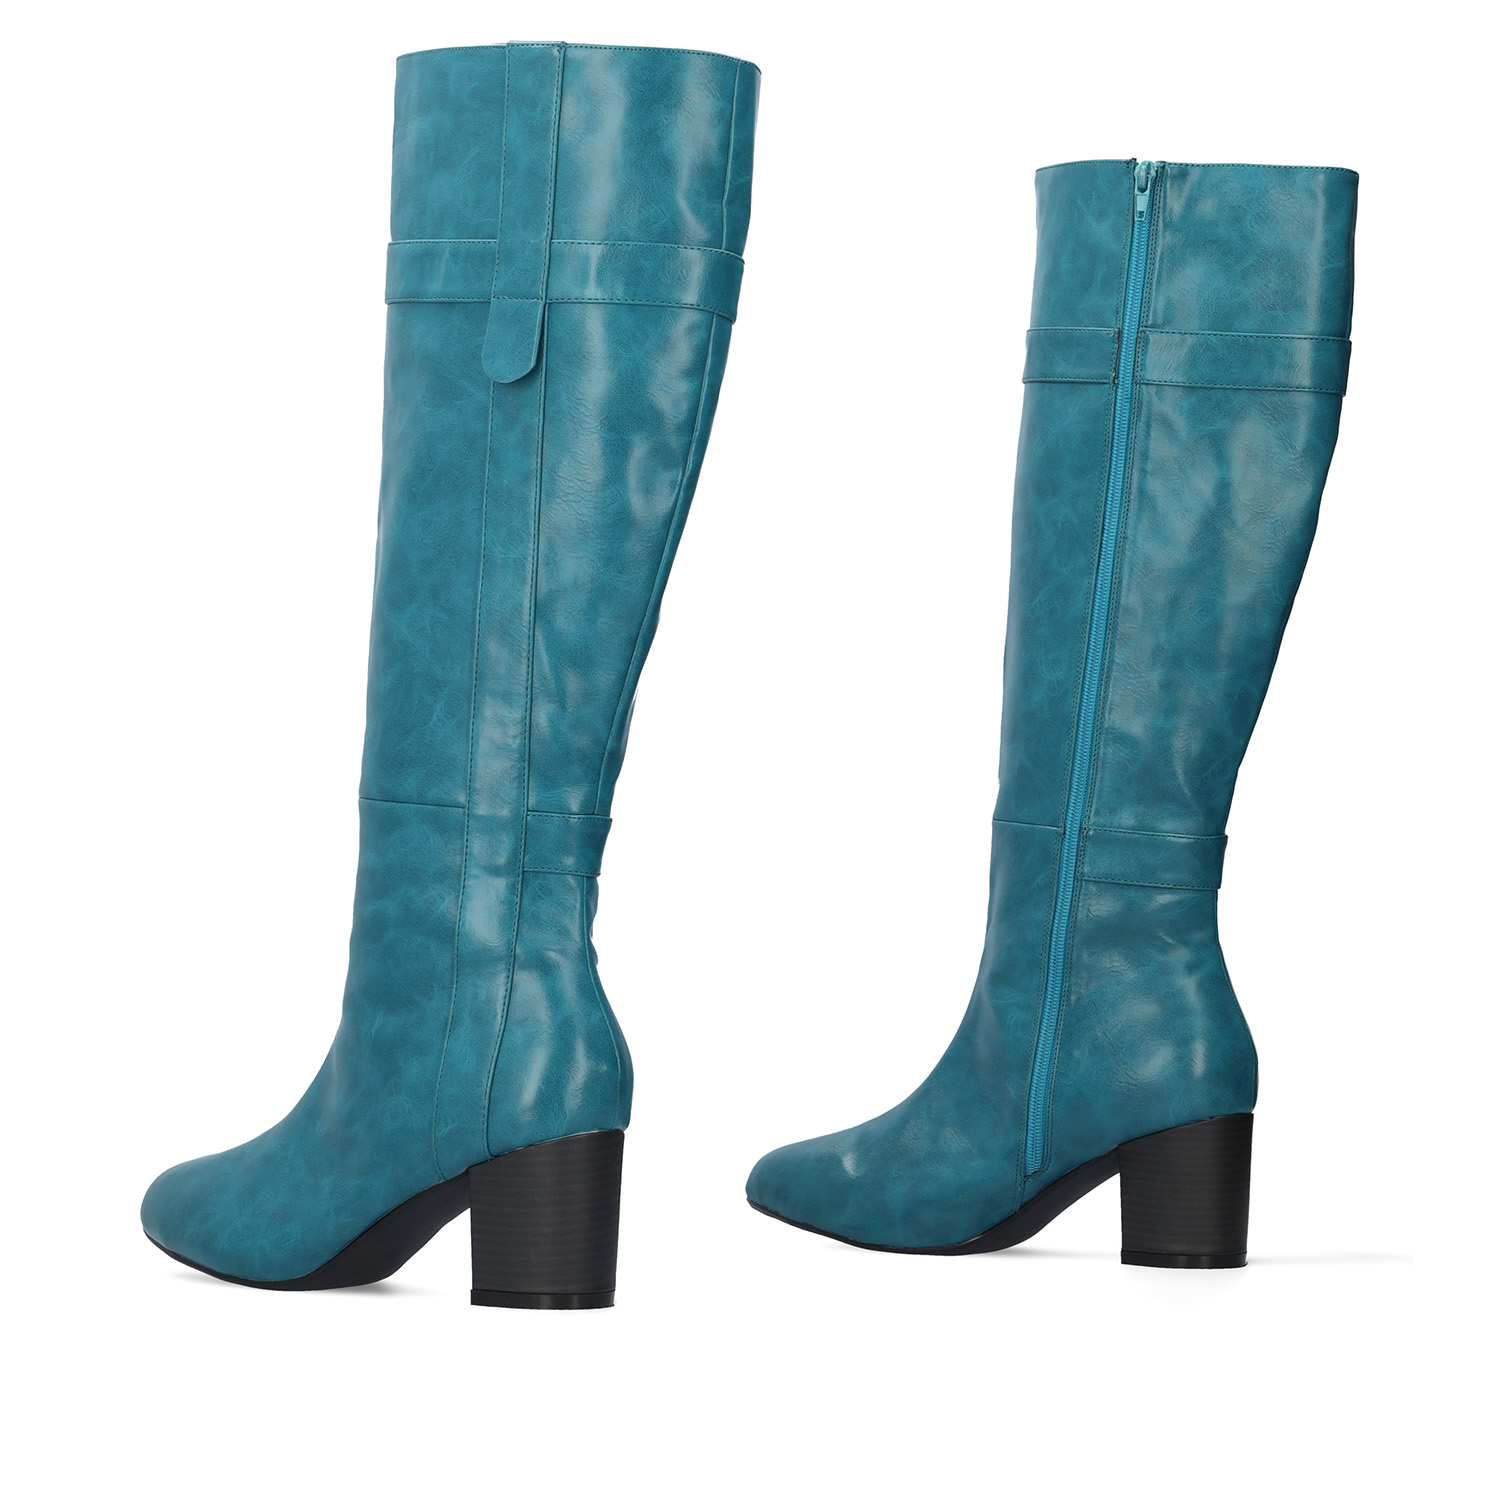 Heeled high-calf boots in blue faux leather 